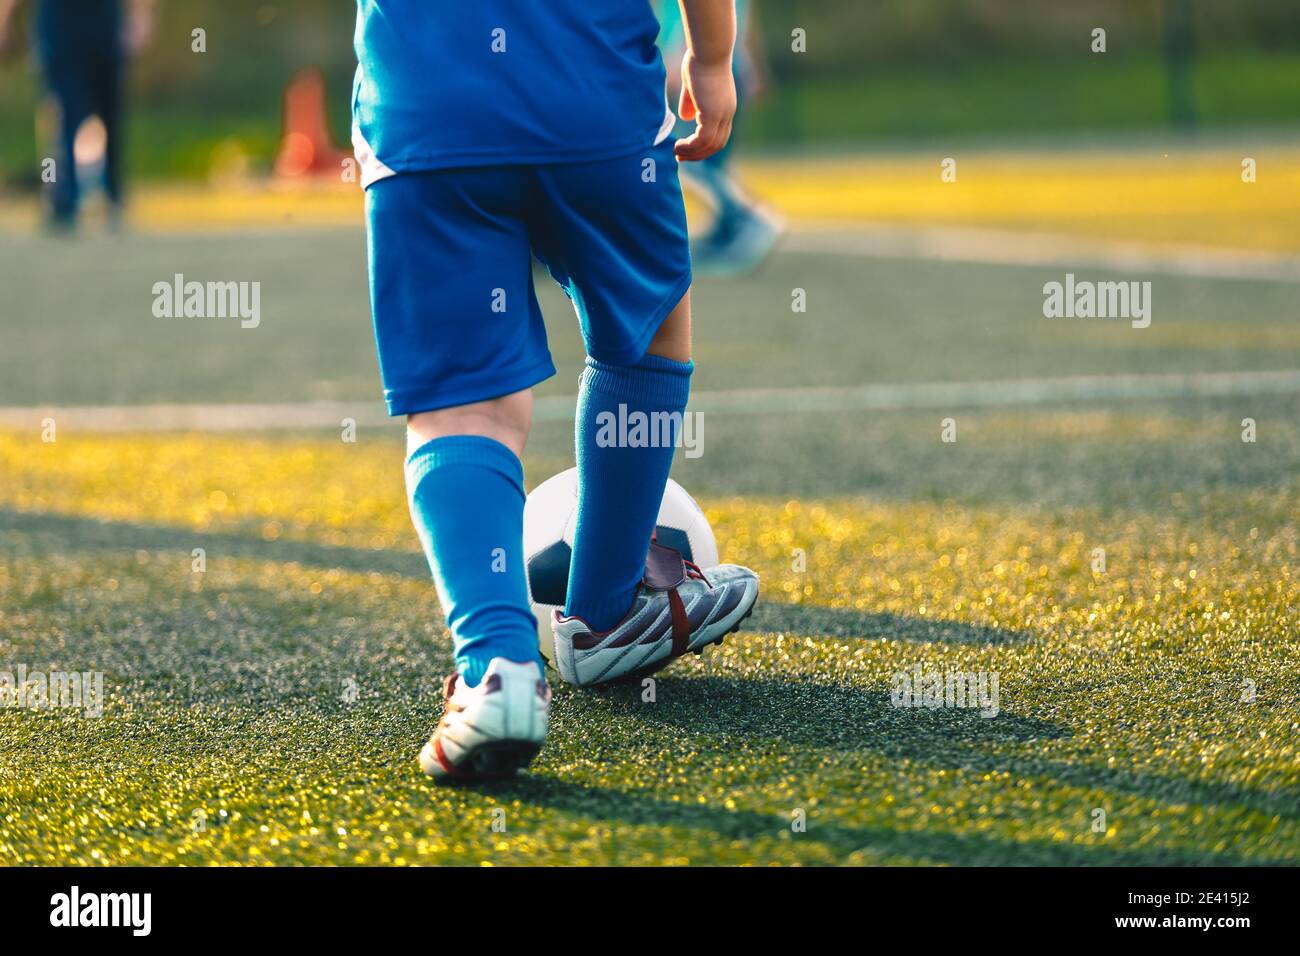 Child playing sports. Kids playing football ball on grass pitch. Soccer training on summer sunny day Stock Photo